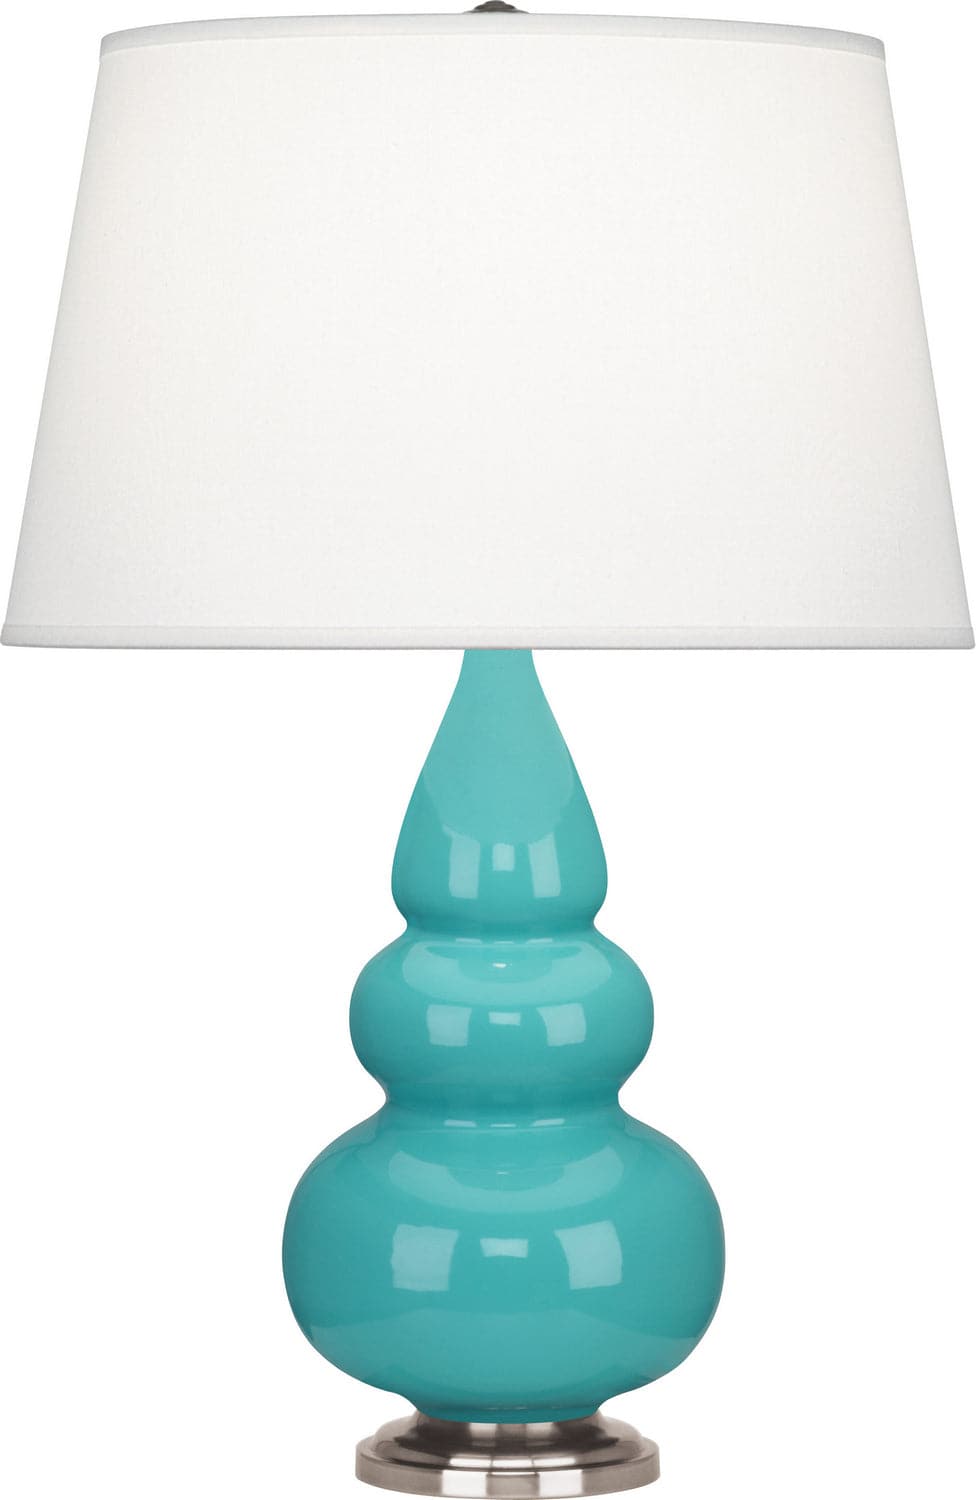 Robert Abbey - 292X - One Light Accent Lamp - Small Triple Gourd - Egg Blue Glazed w/Antique Silver